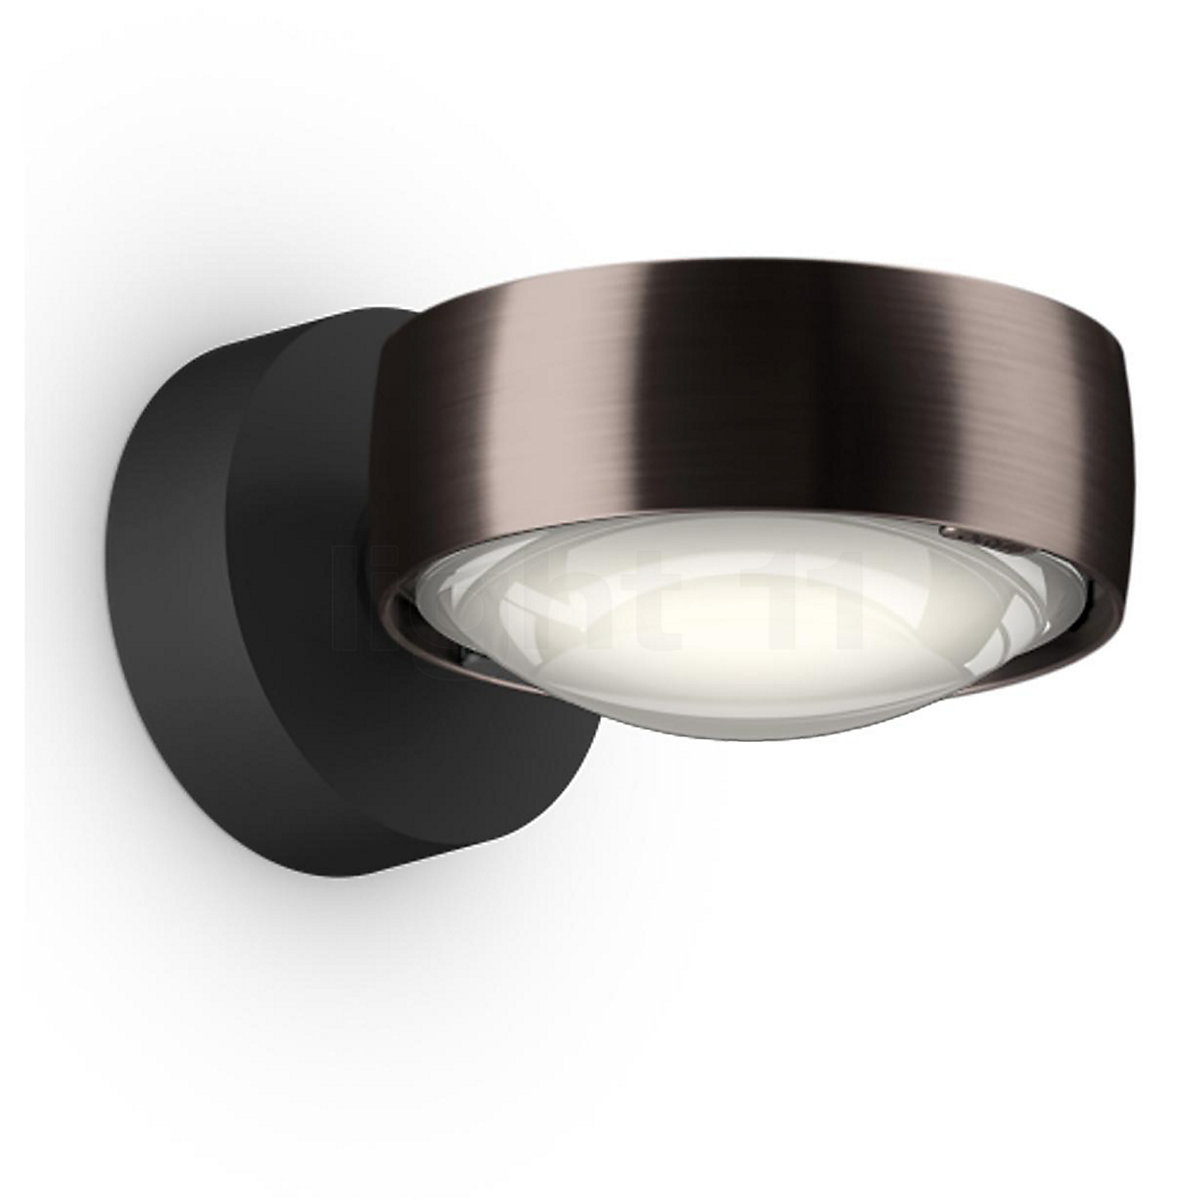 Buy Occhio Sento Verticale Up E Wall Light LED fixed at